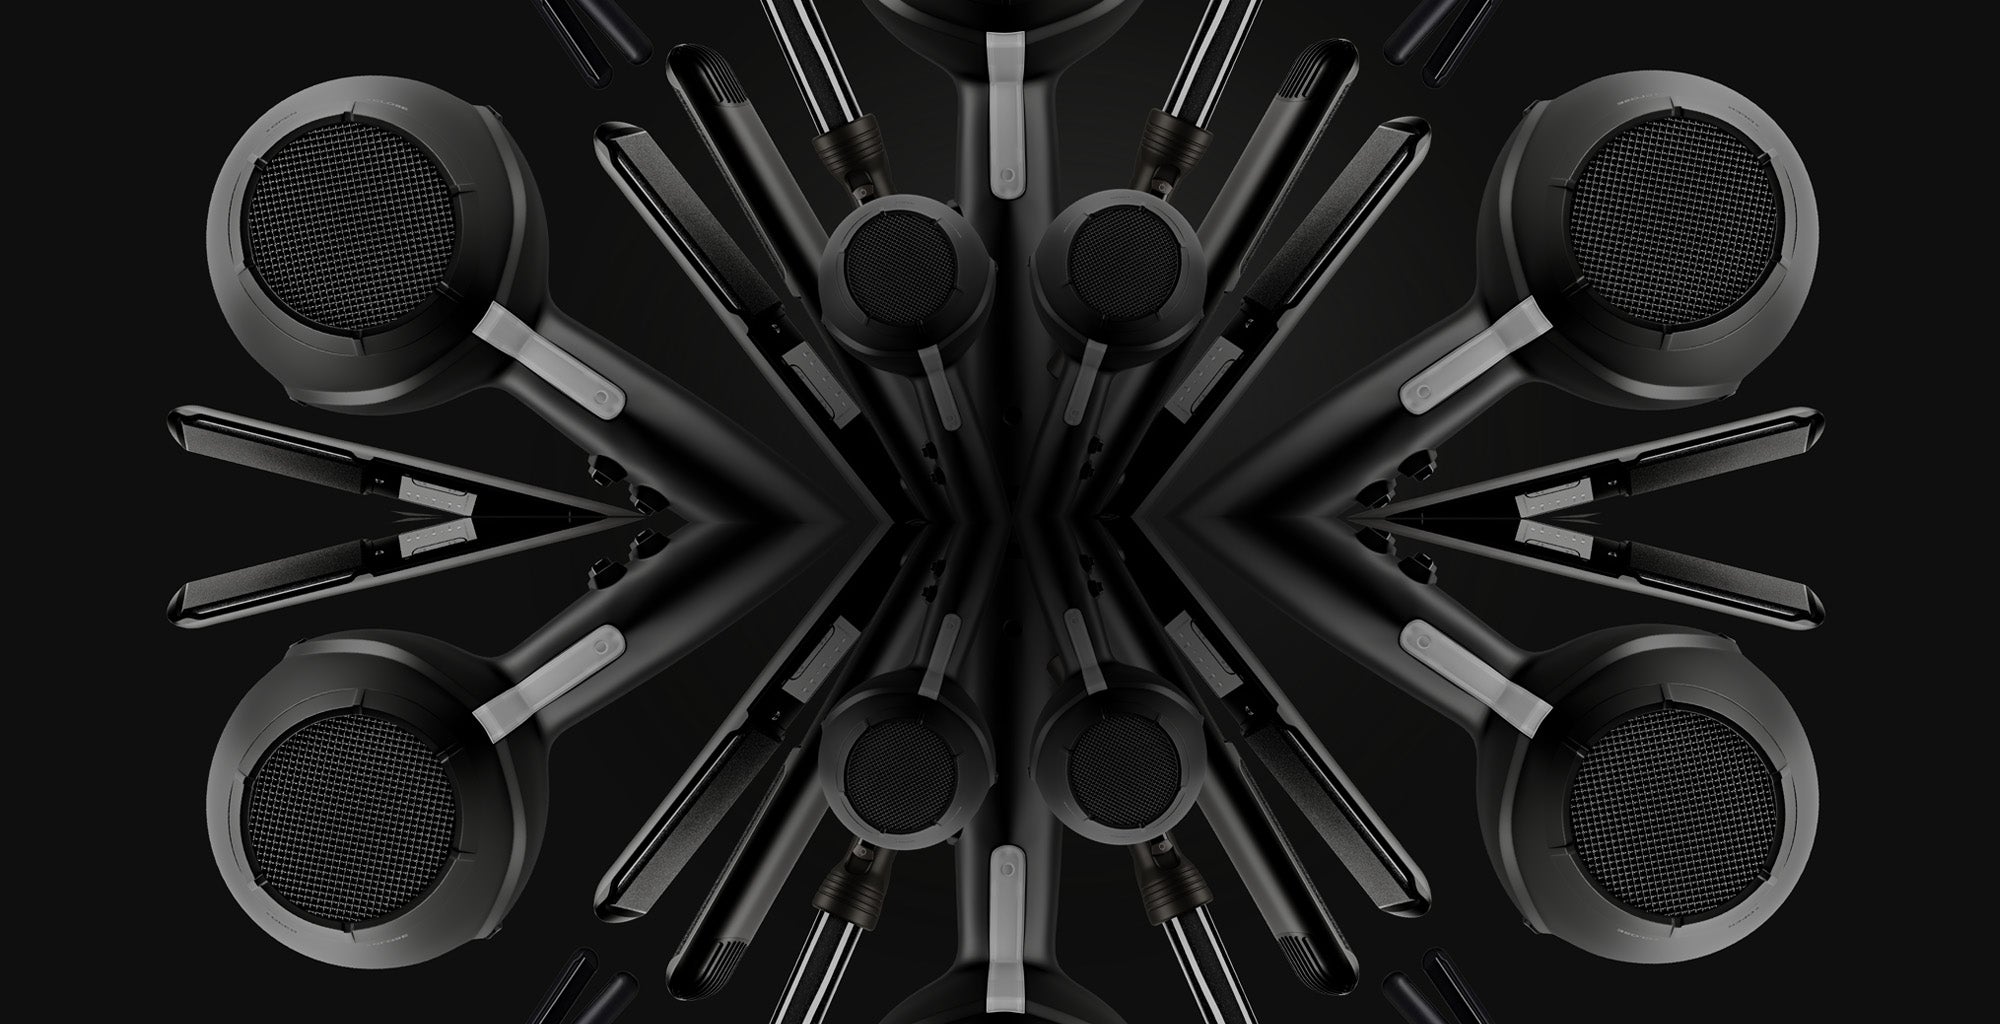 A mirrored image of black CLOUD NINE straighteners, curlers and hair dryers on a black background. The products fan out from the centre.